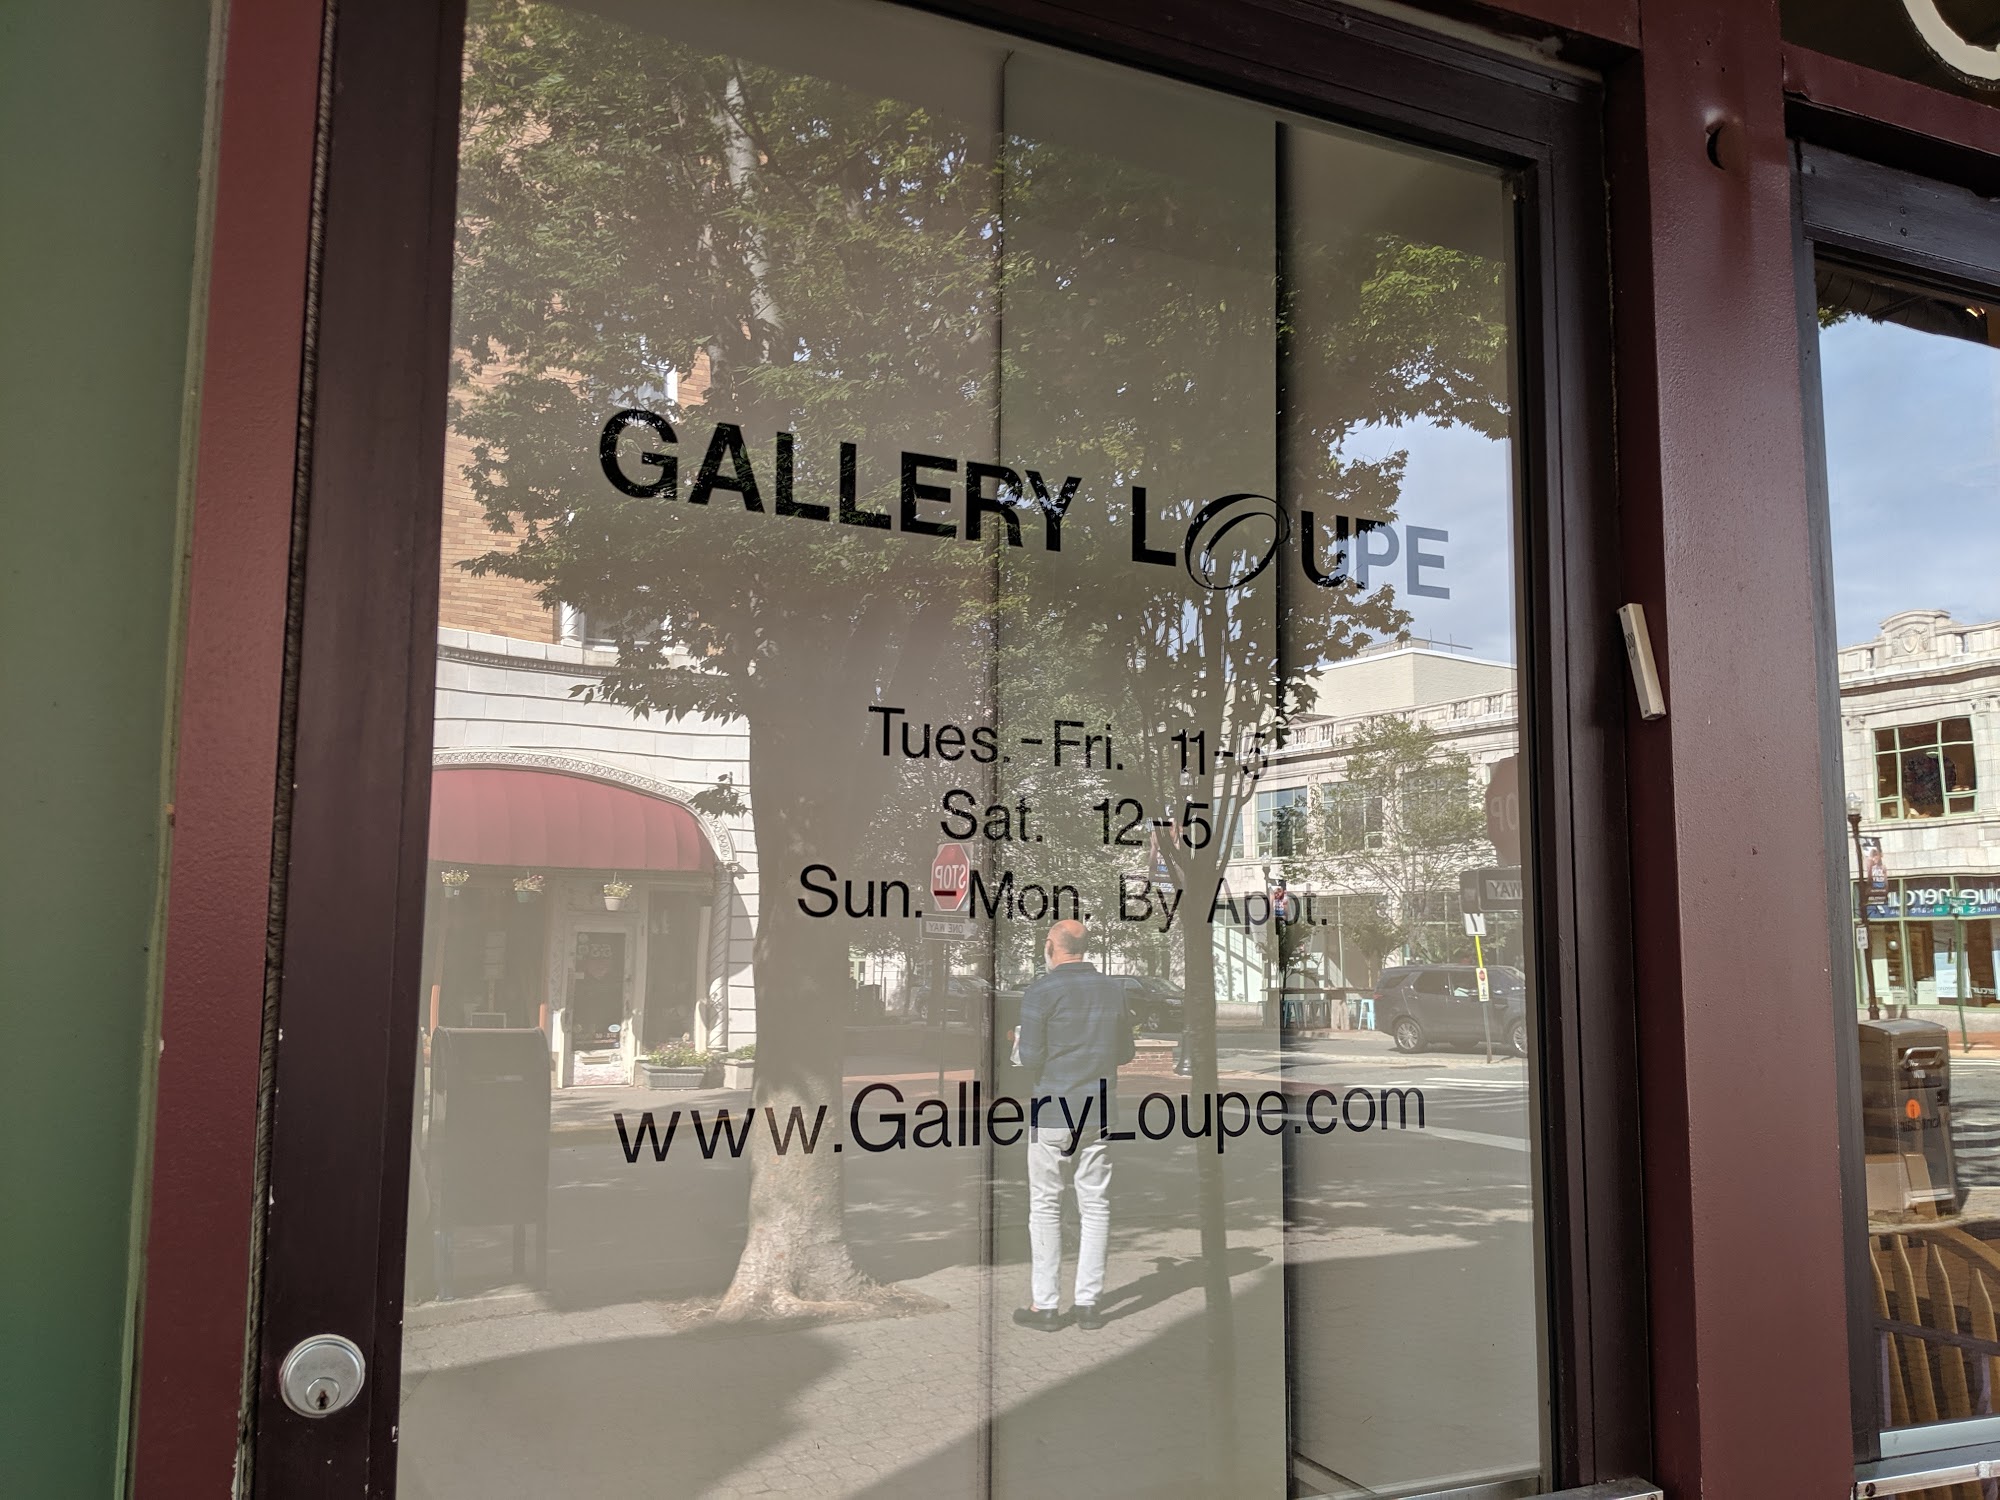 Gallery Loupe